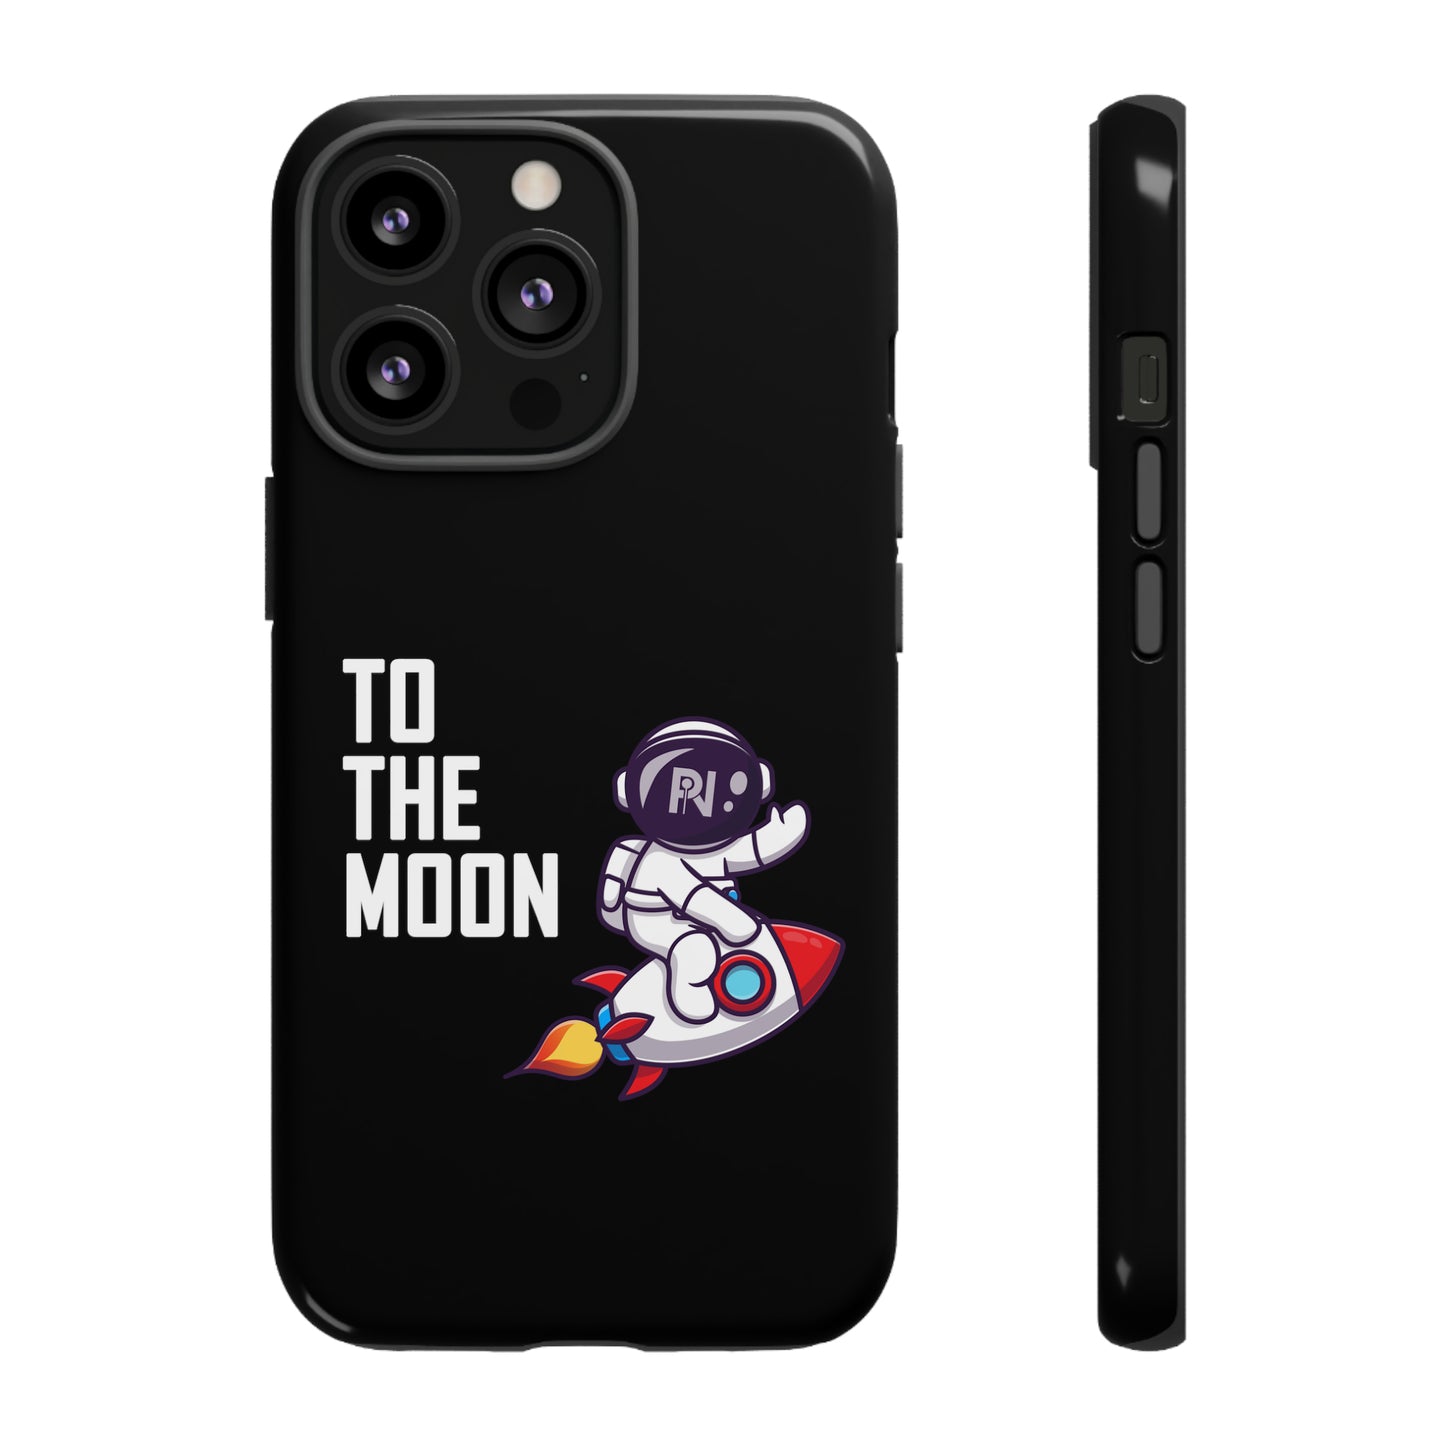 Universal Tough Case (To the moon)